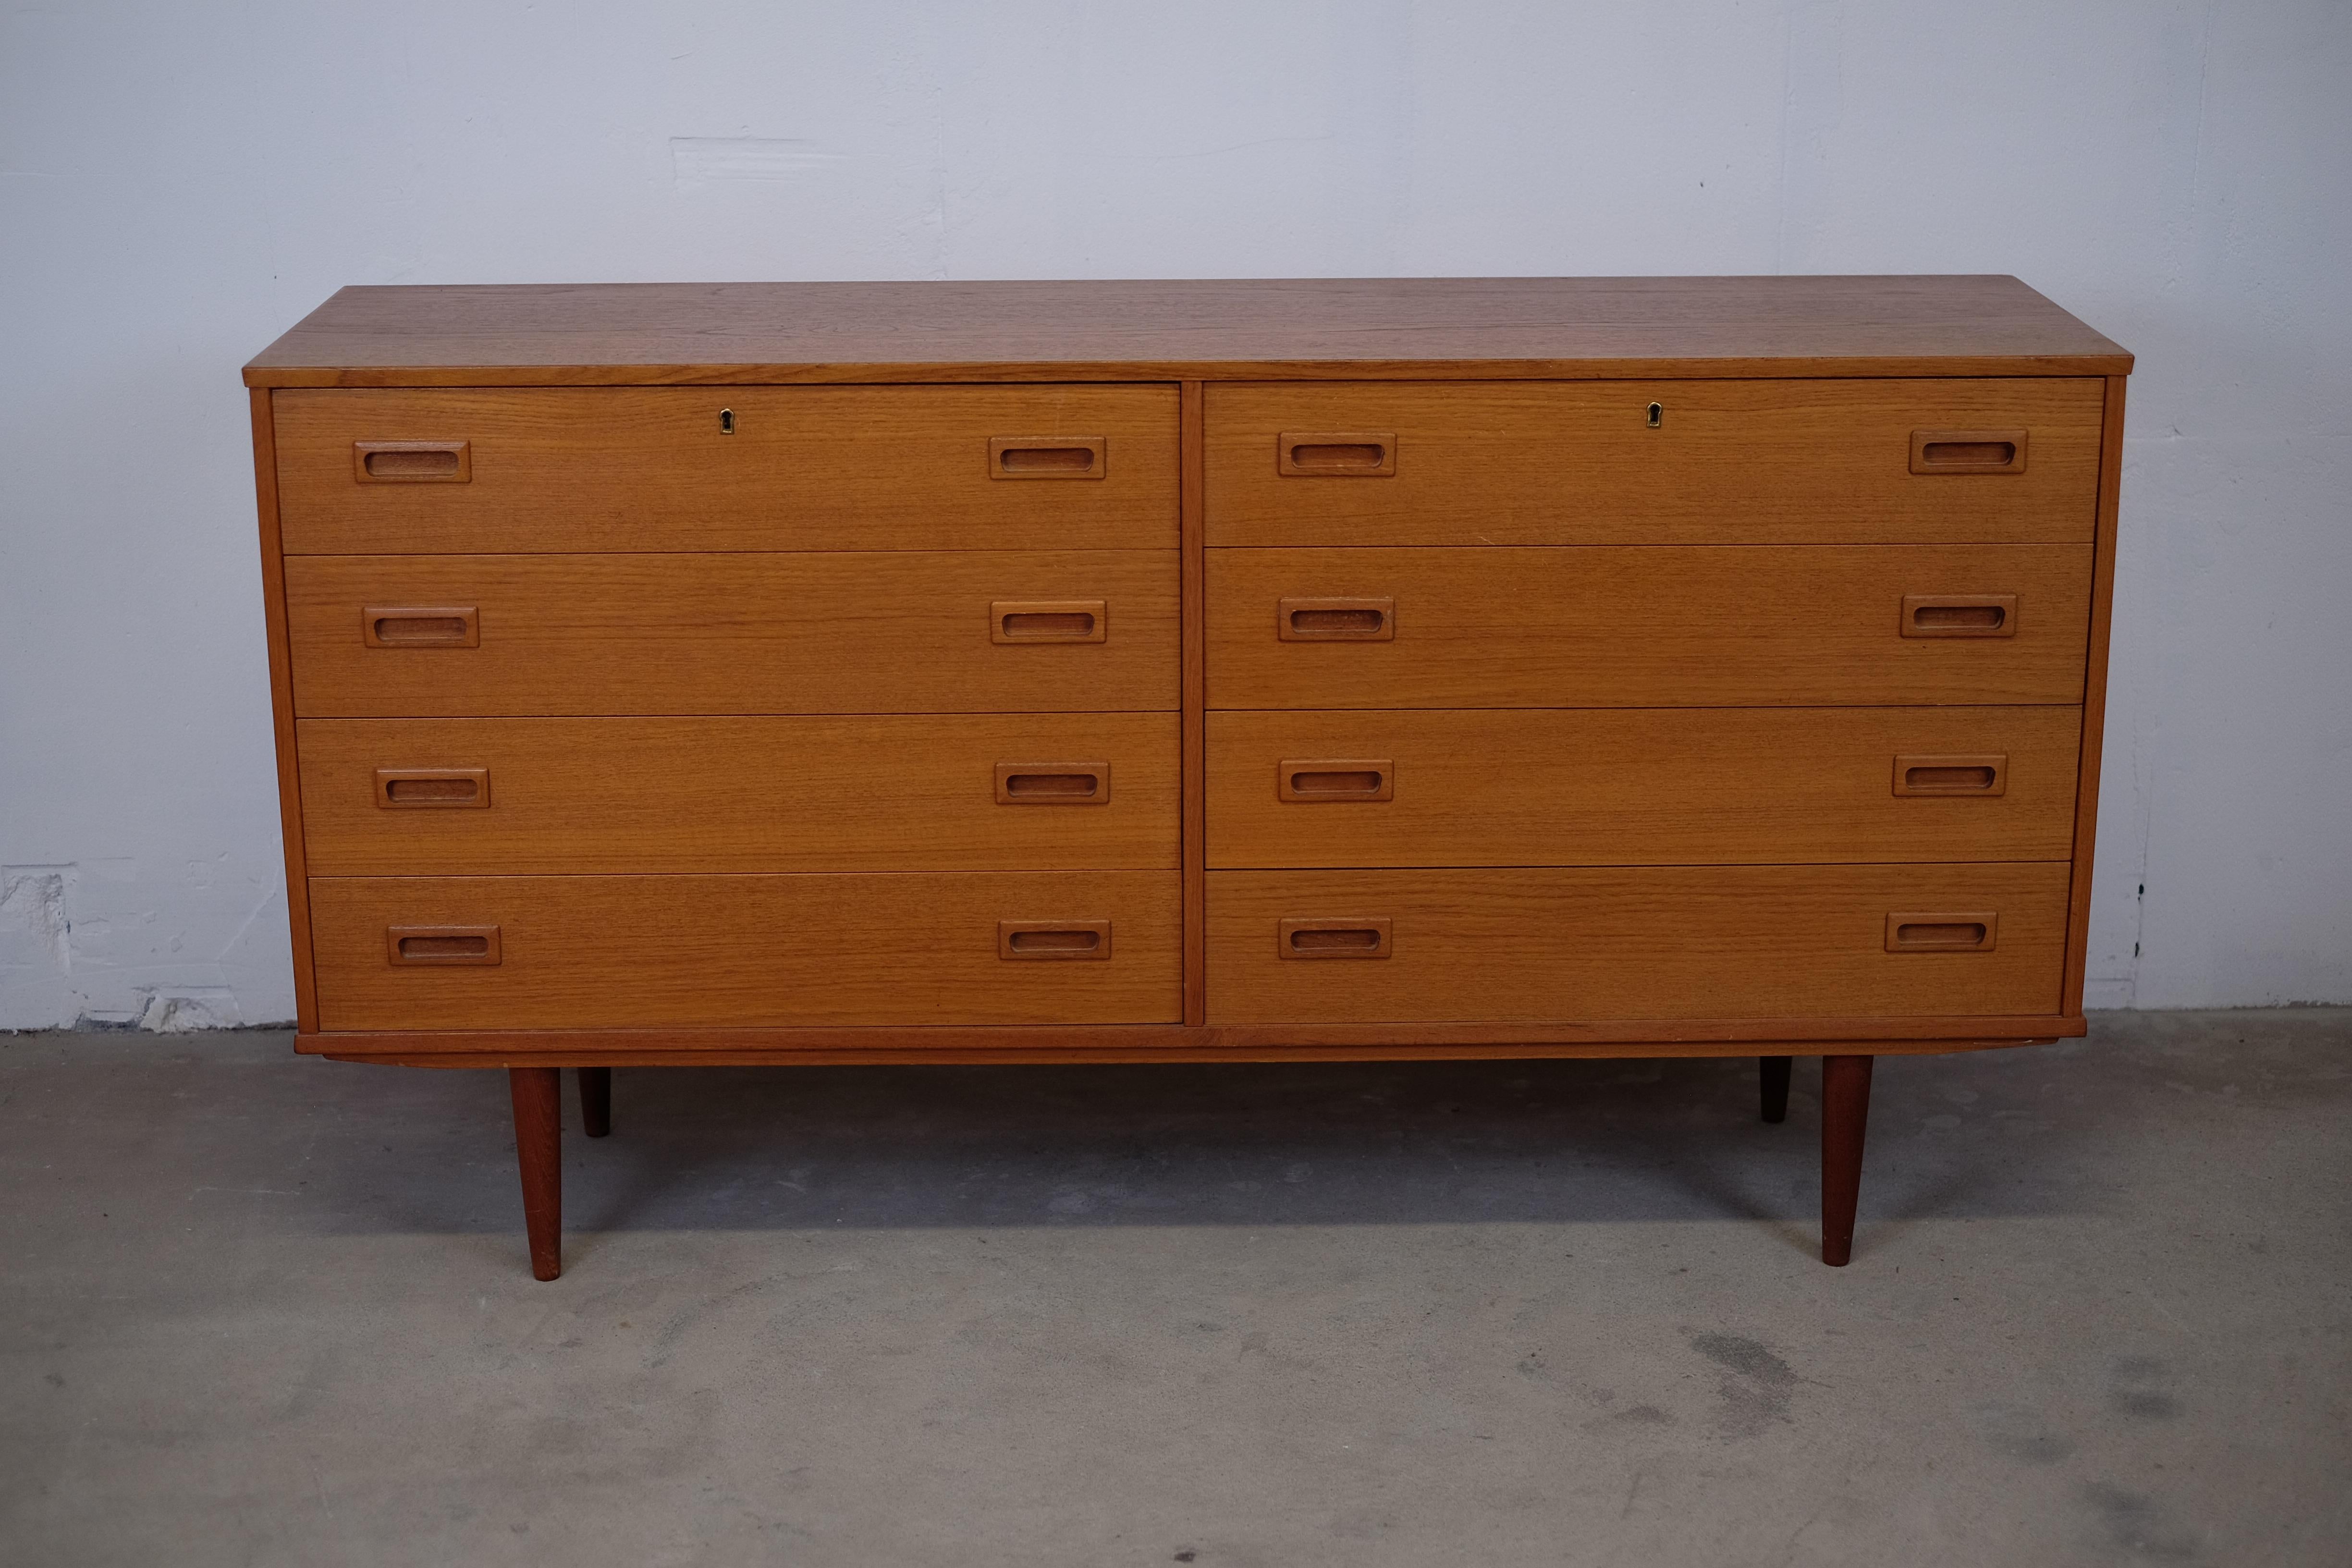 Danish modern dresser designed by Poul Hundevad & Co in the start 1960s. Beautiful design double dresser in teak with eight drawers, rectangular recessed pulls for a clean, minimalistic design.

The veneer has minor chip in the left side, see the